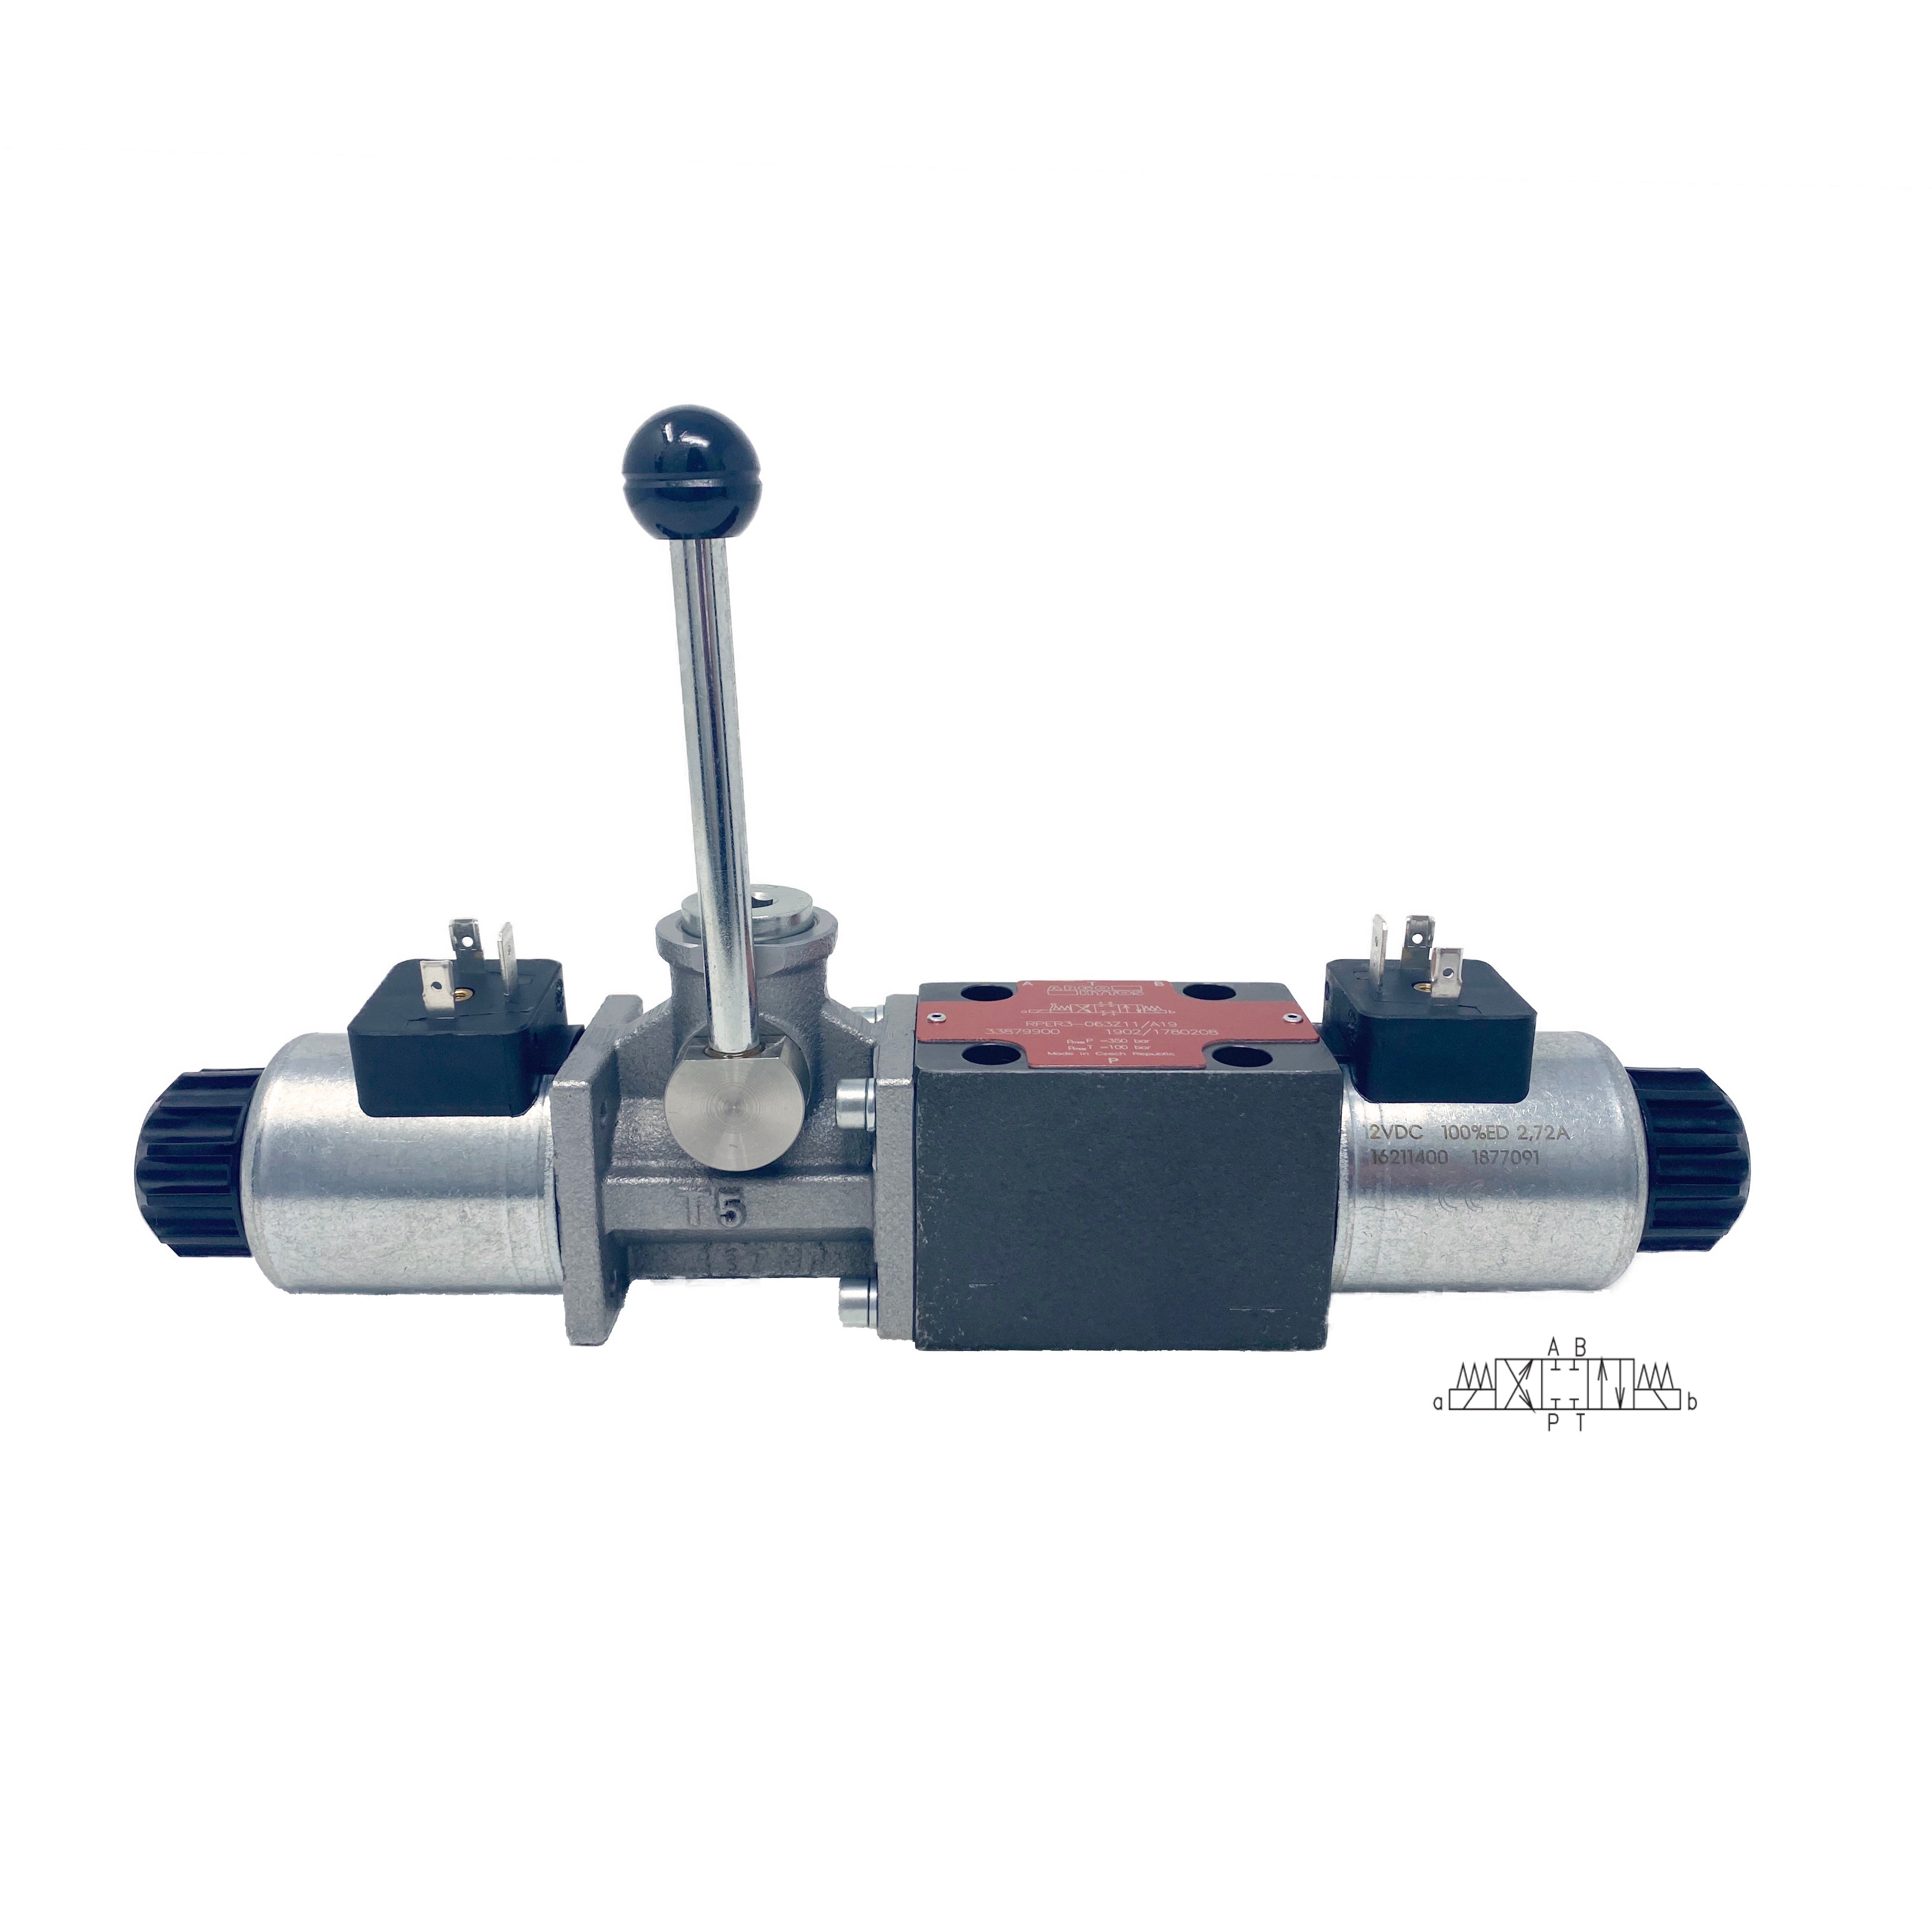 RPER3-063Z11/02400E1/A19 : Argo Directional Control Valve w/ Override Lever, D03, 21GPM, 5100psi, 3P4W, 24 VDC, DIN, Spring Centered, Cylinder Spool